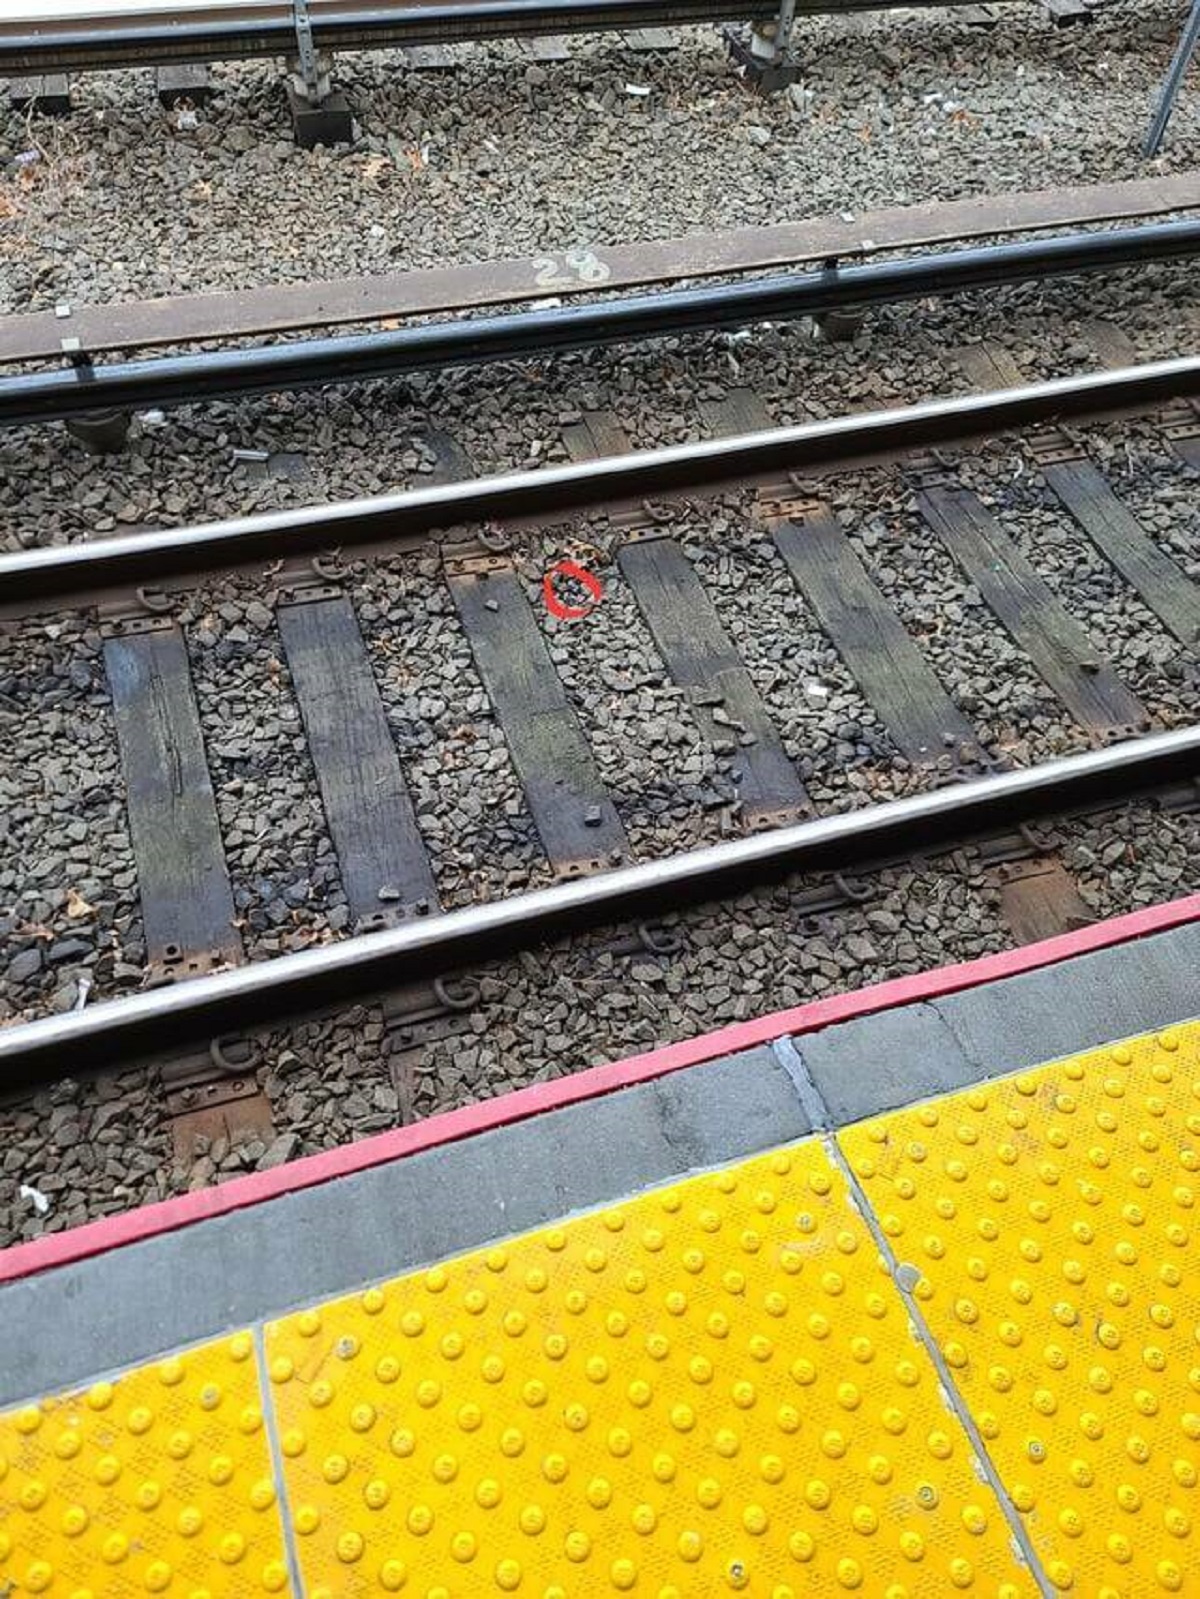 "Dropped one of my wireless earbuds on the train tracks all of 10 minutes into the 3 hour trip"